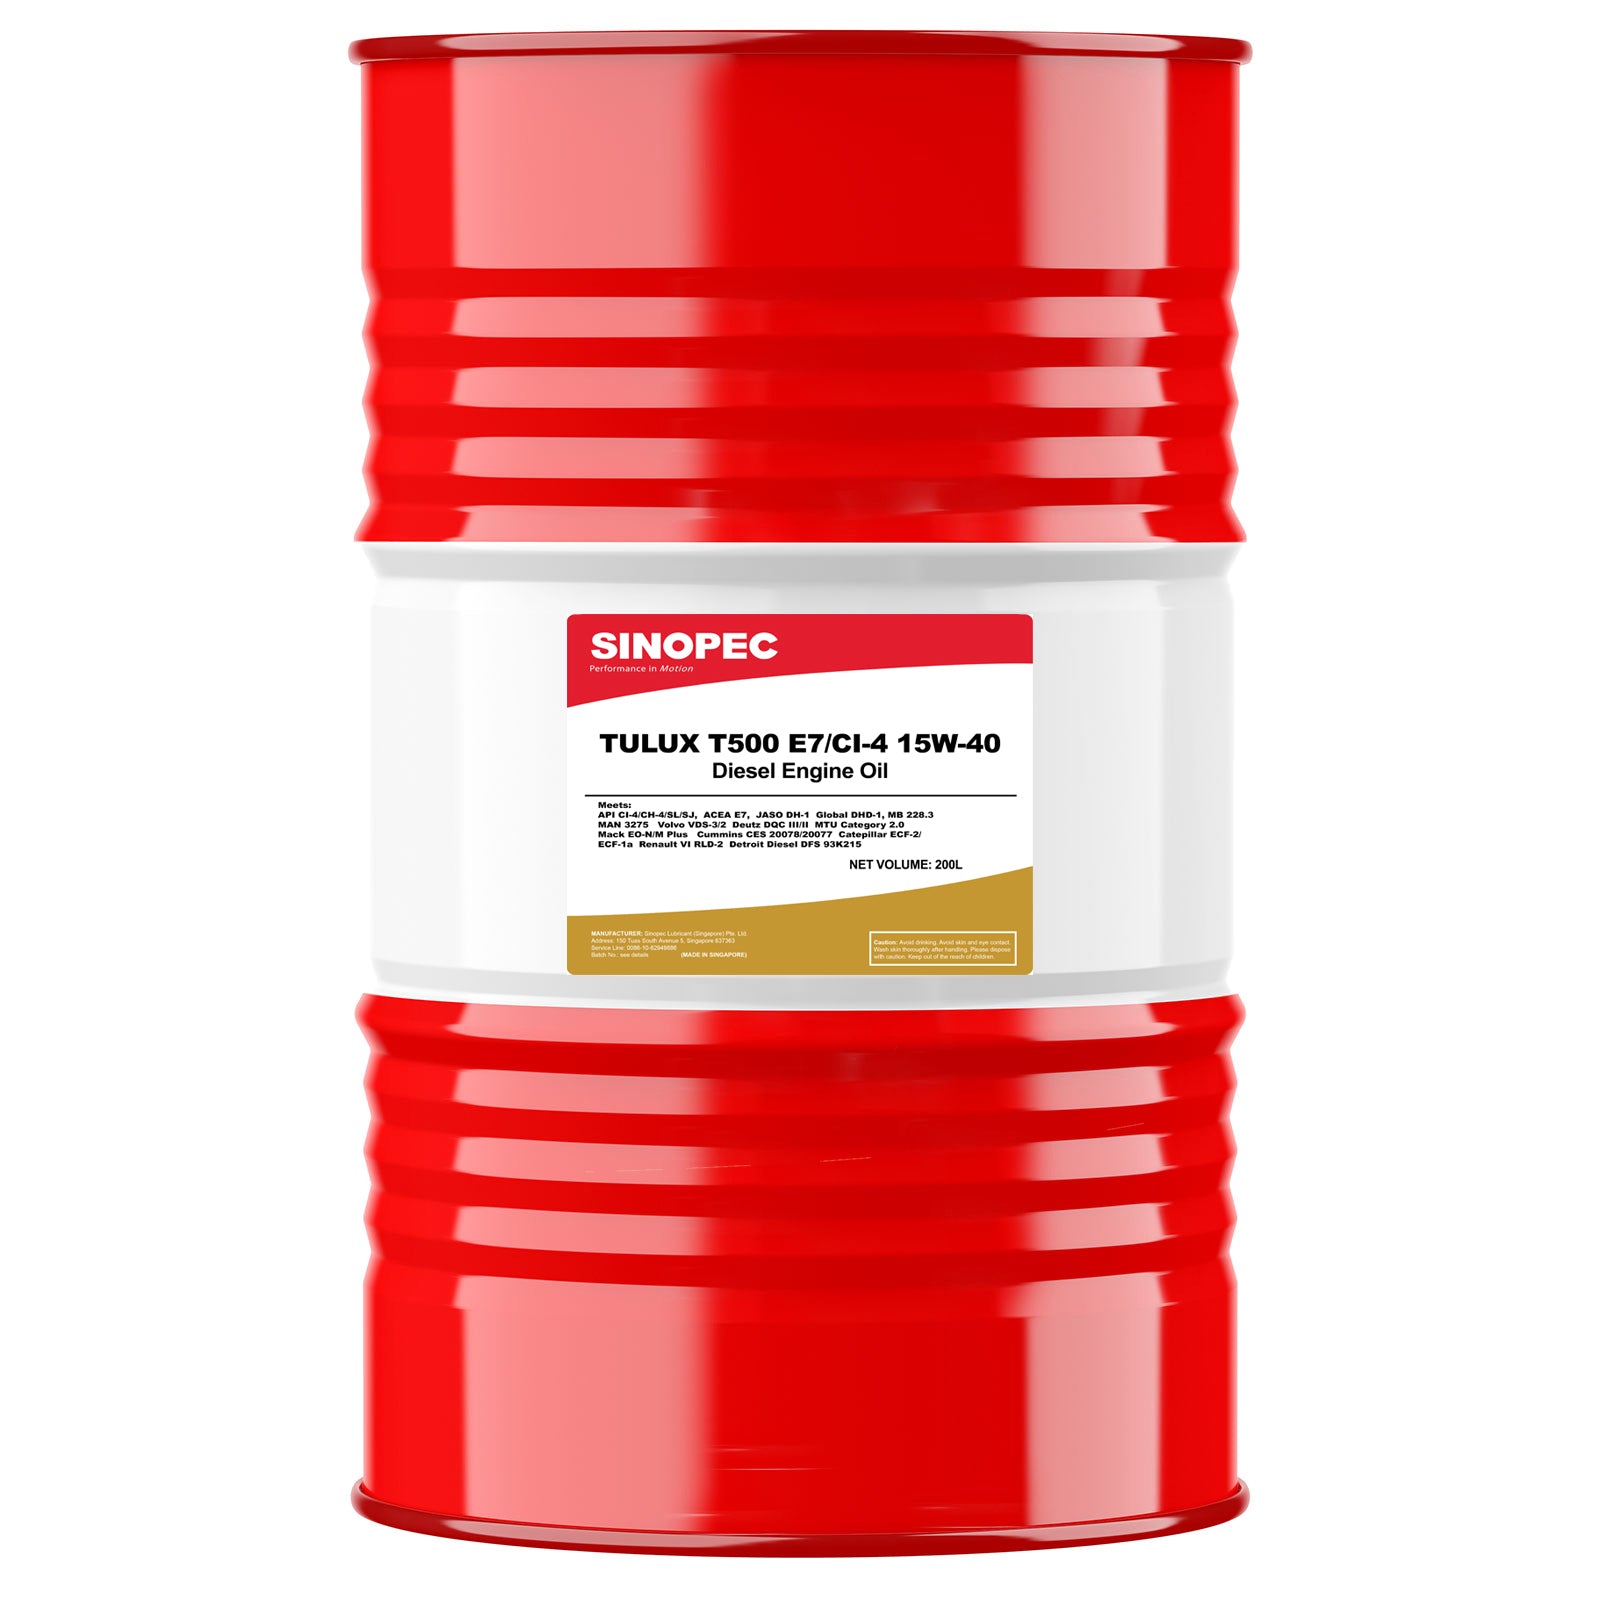 15W40 CK-4 Synthetic Diesel Engine Oil - 55 Gallon Drum